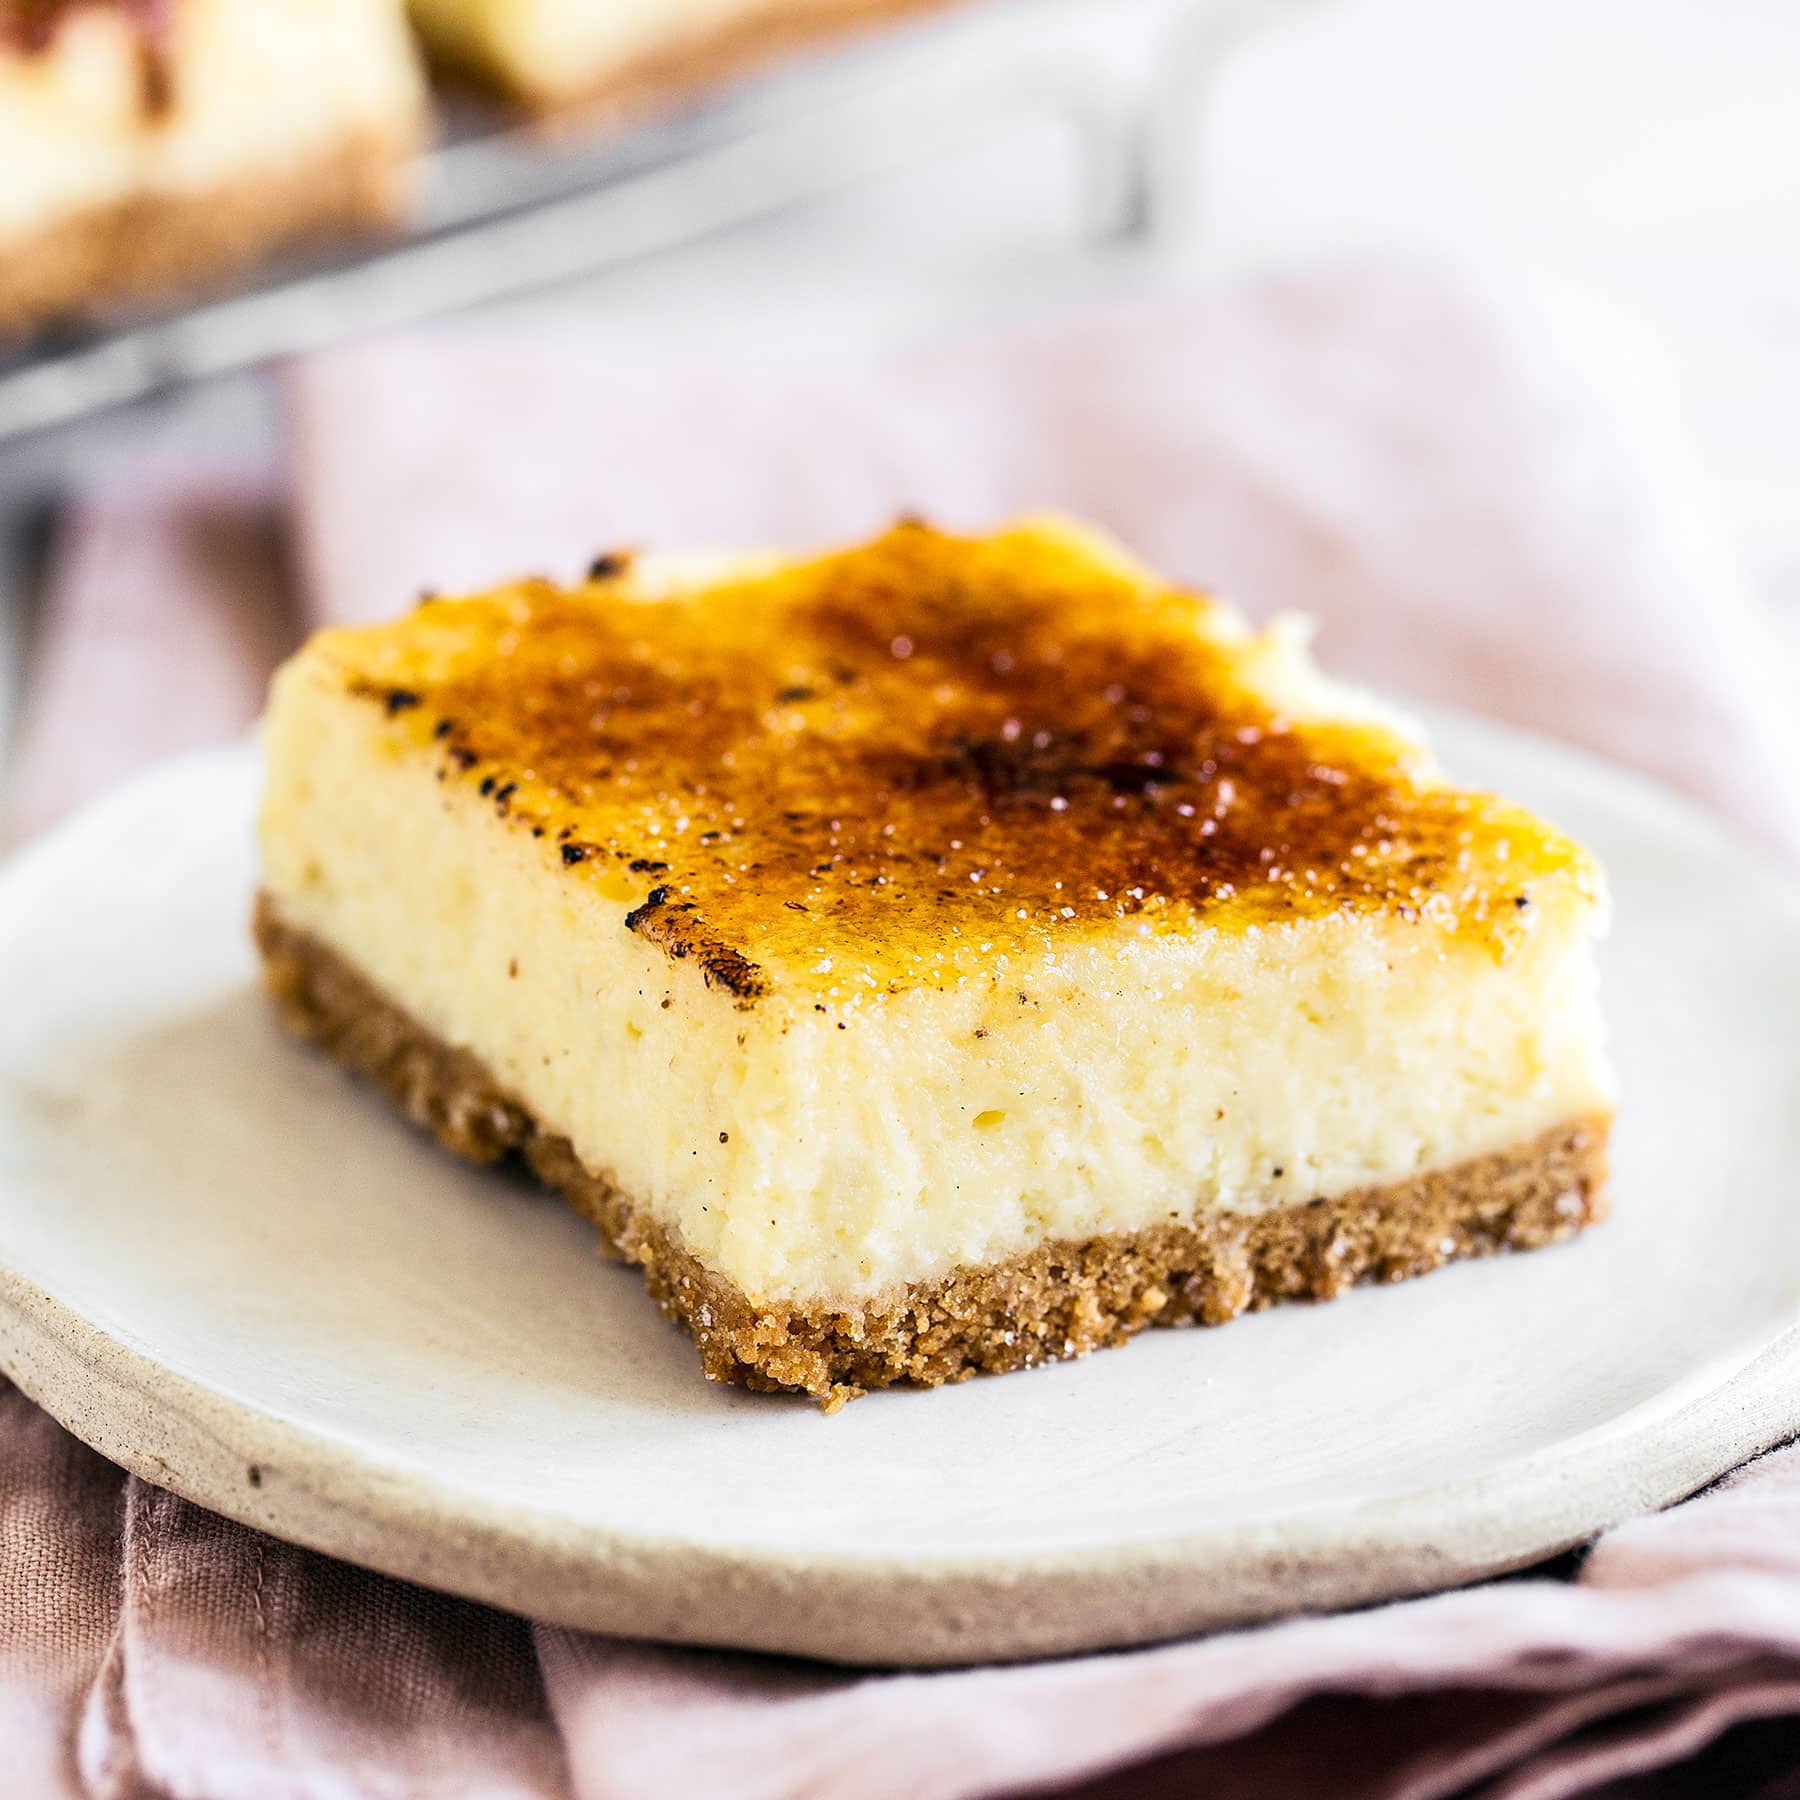 These Creme Brulee Cheesecake Bars turn the classic French dessert into something even easier and tastier!